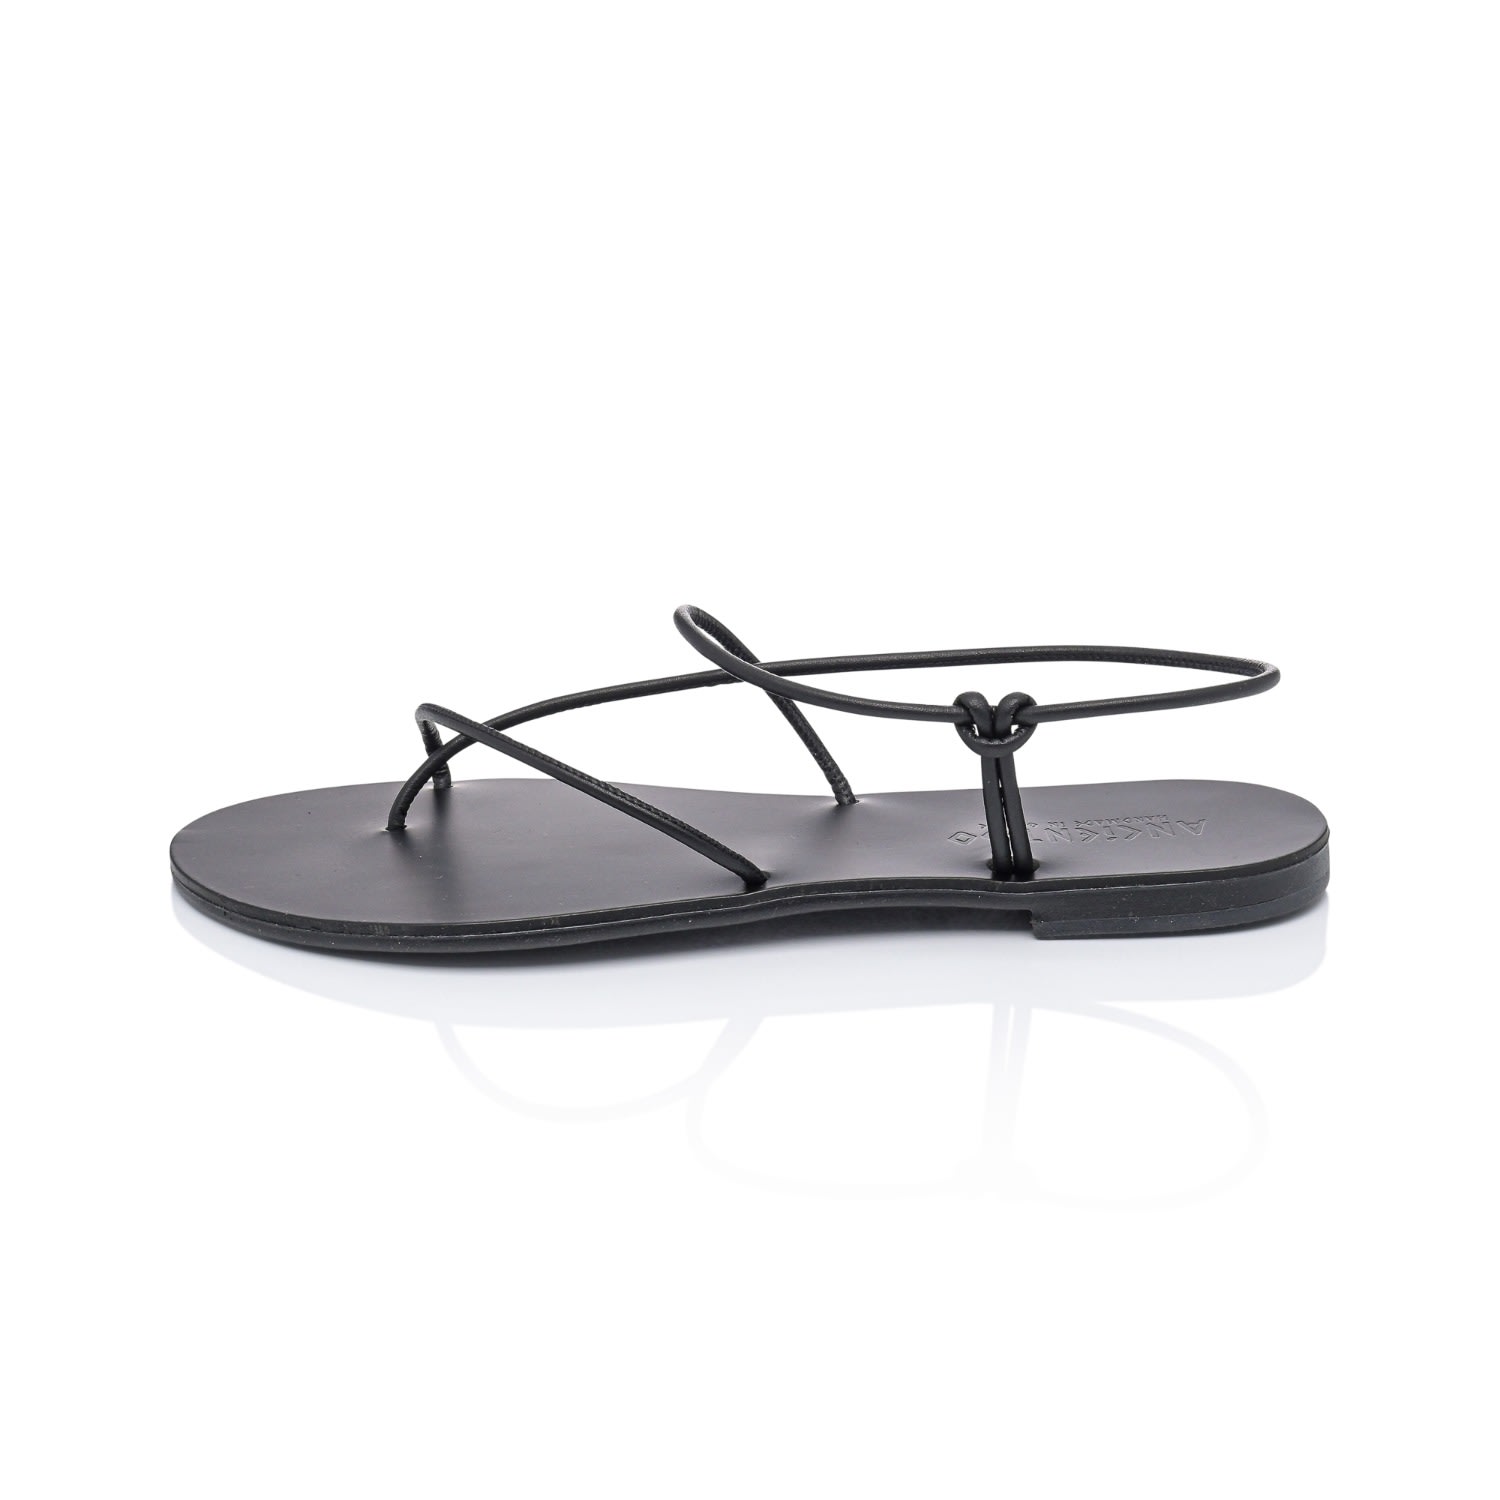 Ancientoo Iaso Cord Black Handcrafted Women's Leather Sandals With A Lasso Style Strap